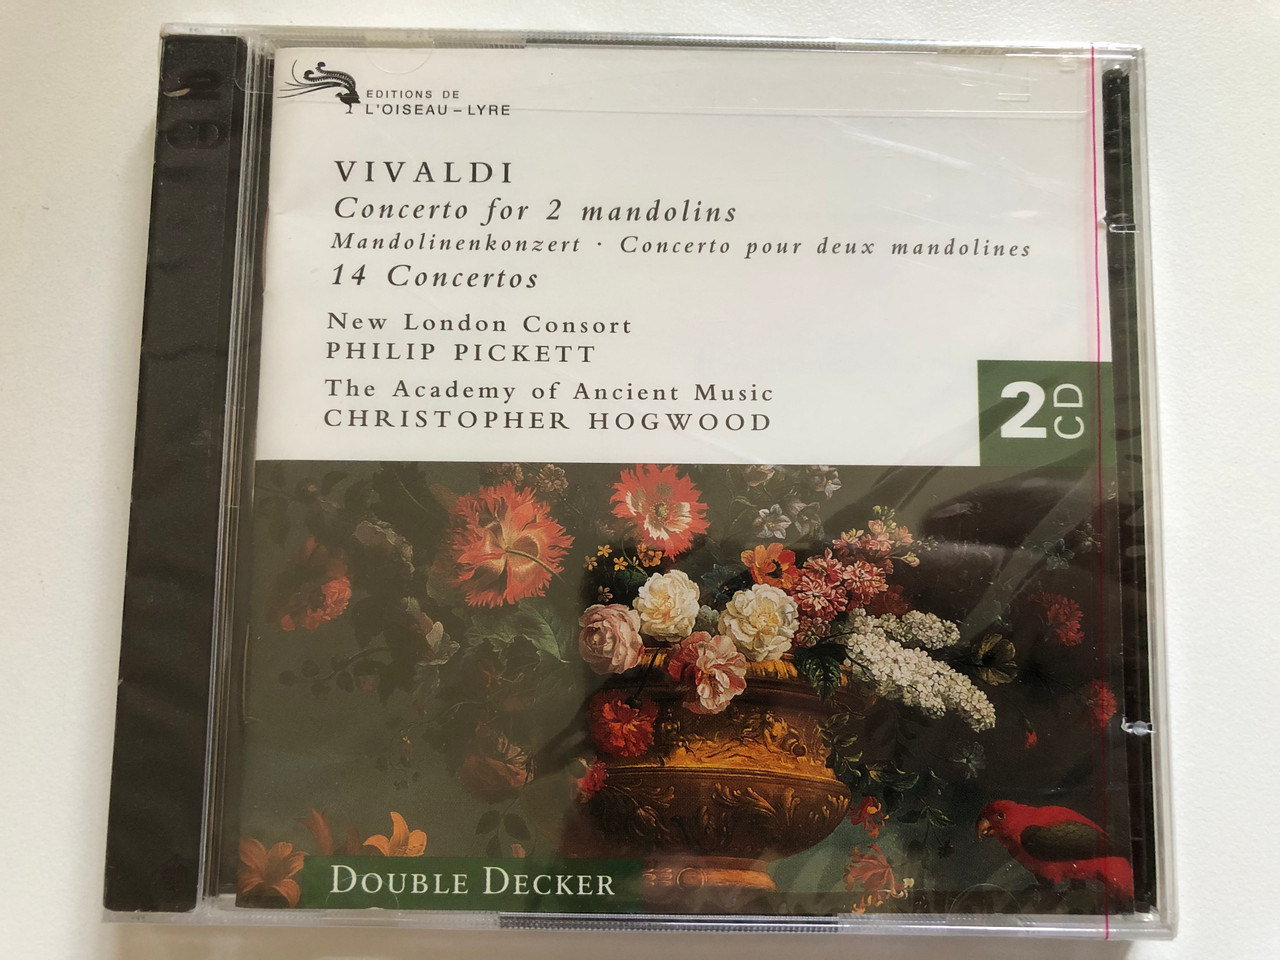 Vivaldi - Concerto For 2 Mandolins; 14 Concertos - New London Consort,  Philip Pickett, The Academy Of Ancient Music, Christopher Hogwood / Double  Decca / L'Oiseau-Lyre 2x Audio CD 1997 / 455 703-2 - Bible in My Language